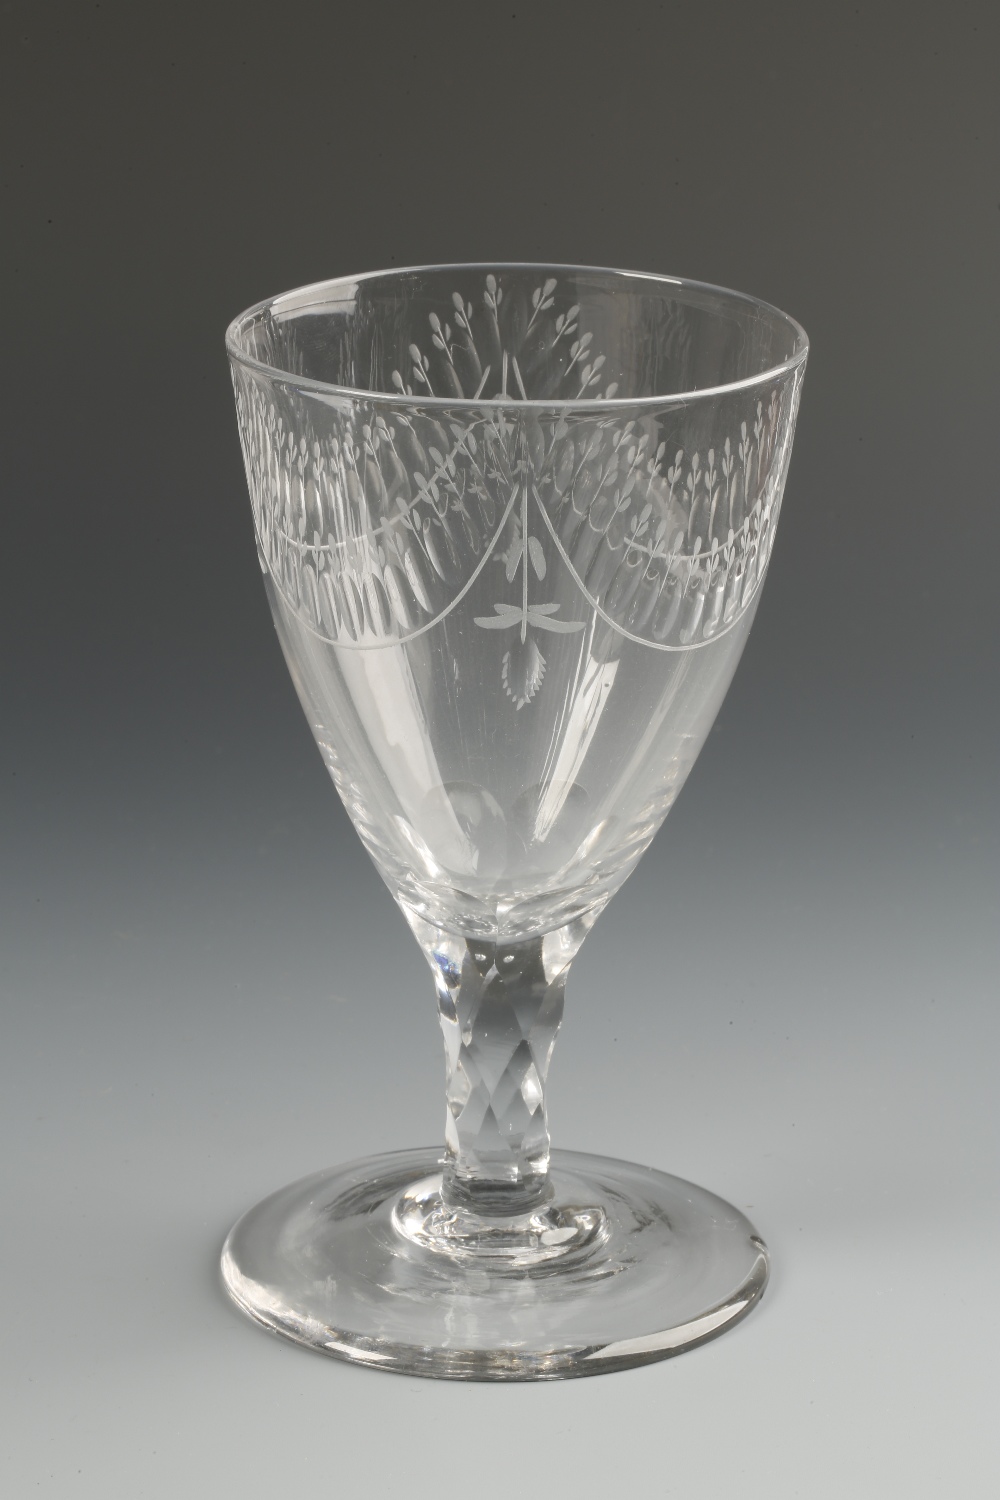 A GEORGE III STYLE WINE GLASS with a broad deep bowl with engraved swag decoration, on a faceted